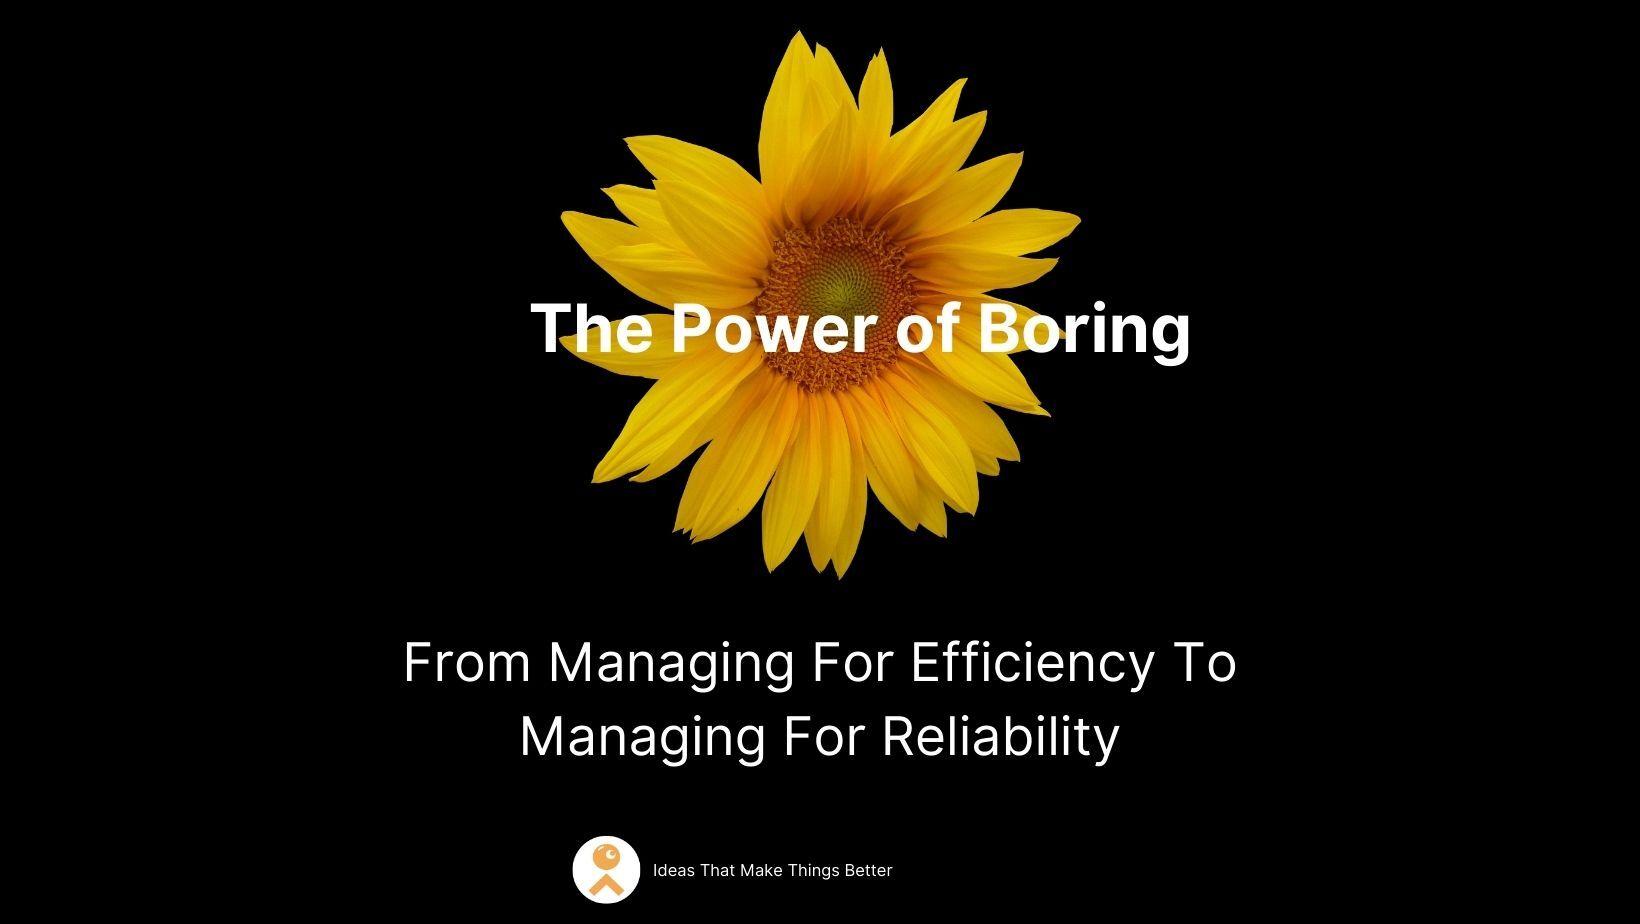 The Power of Boring